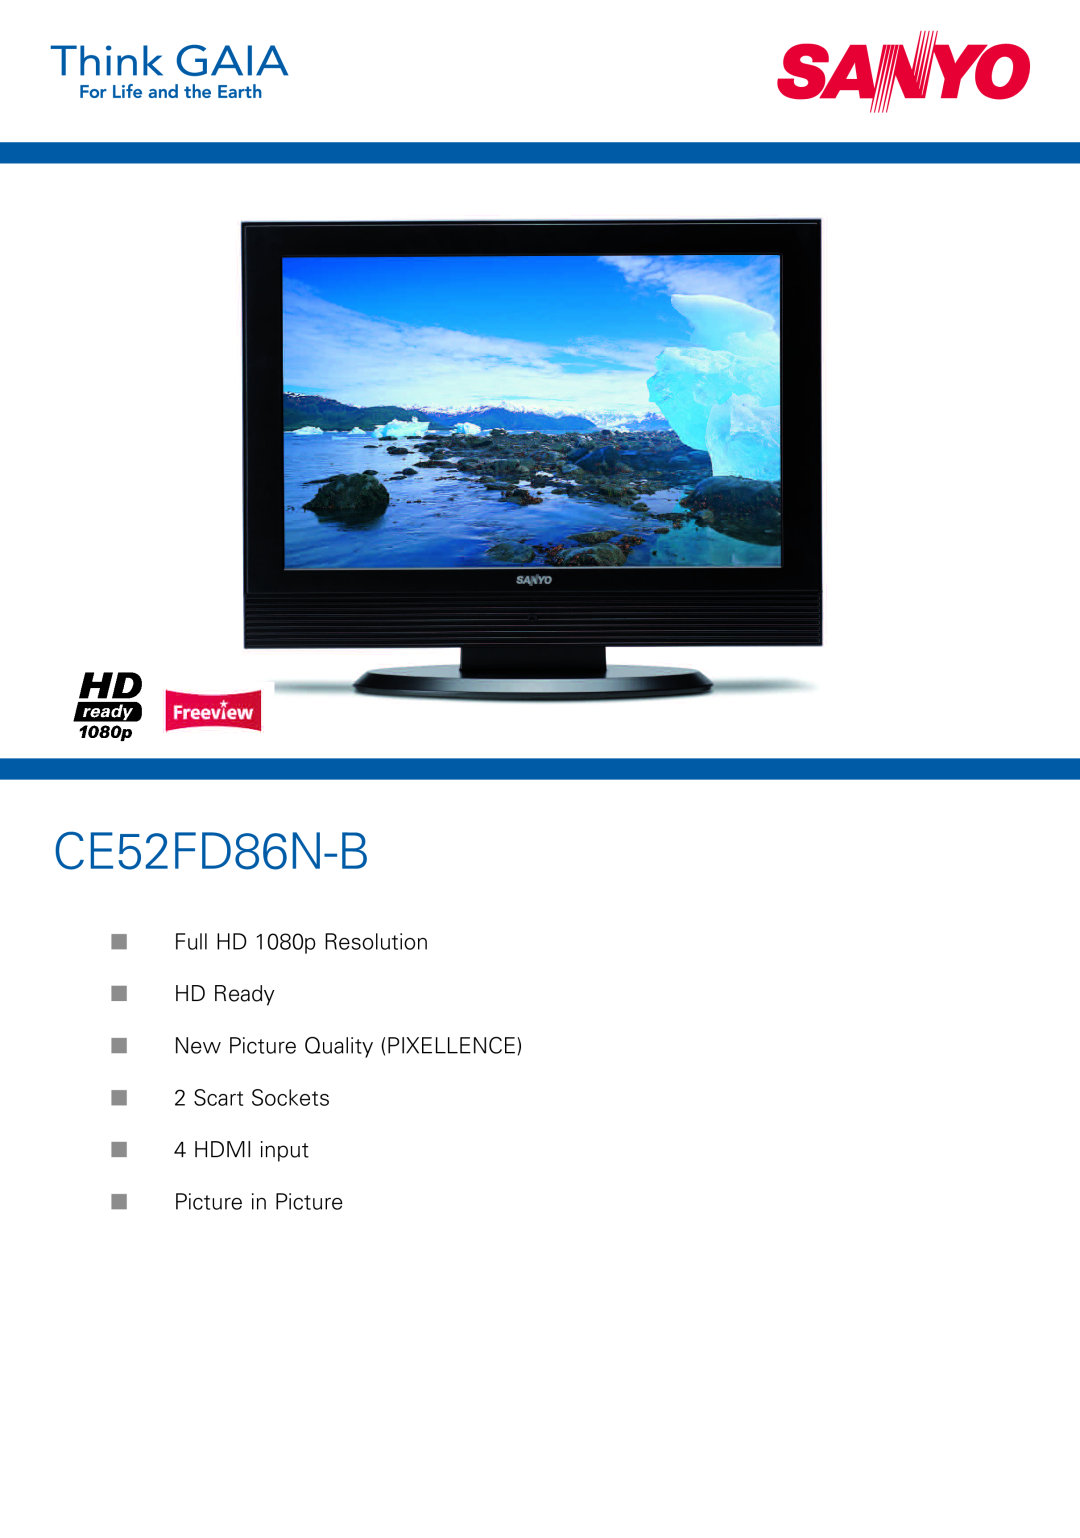 Sanyo CE52FD86N-B manual Full HD 1080p Resolution HD Ready New Picture Quality PIXELLENCE 